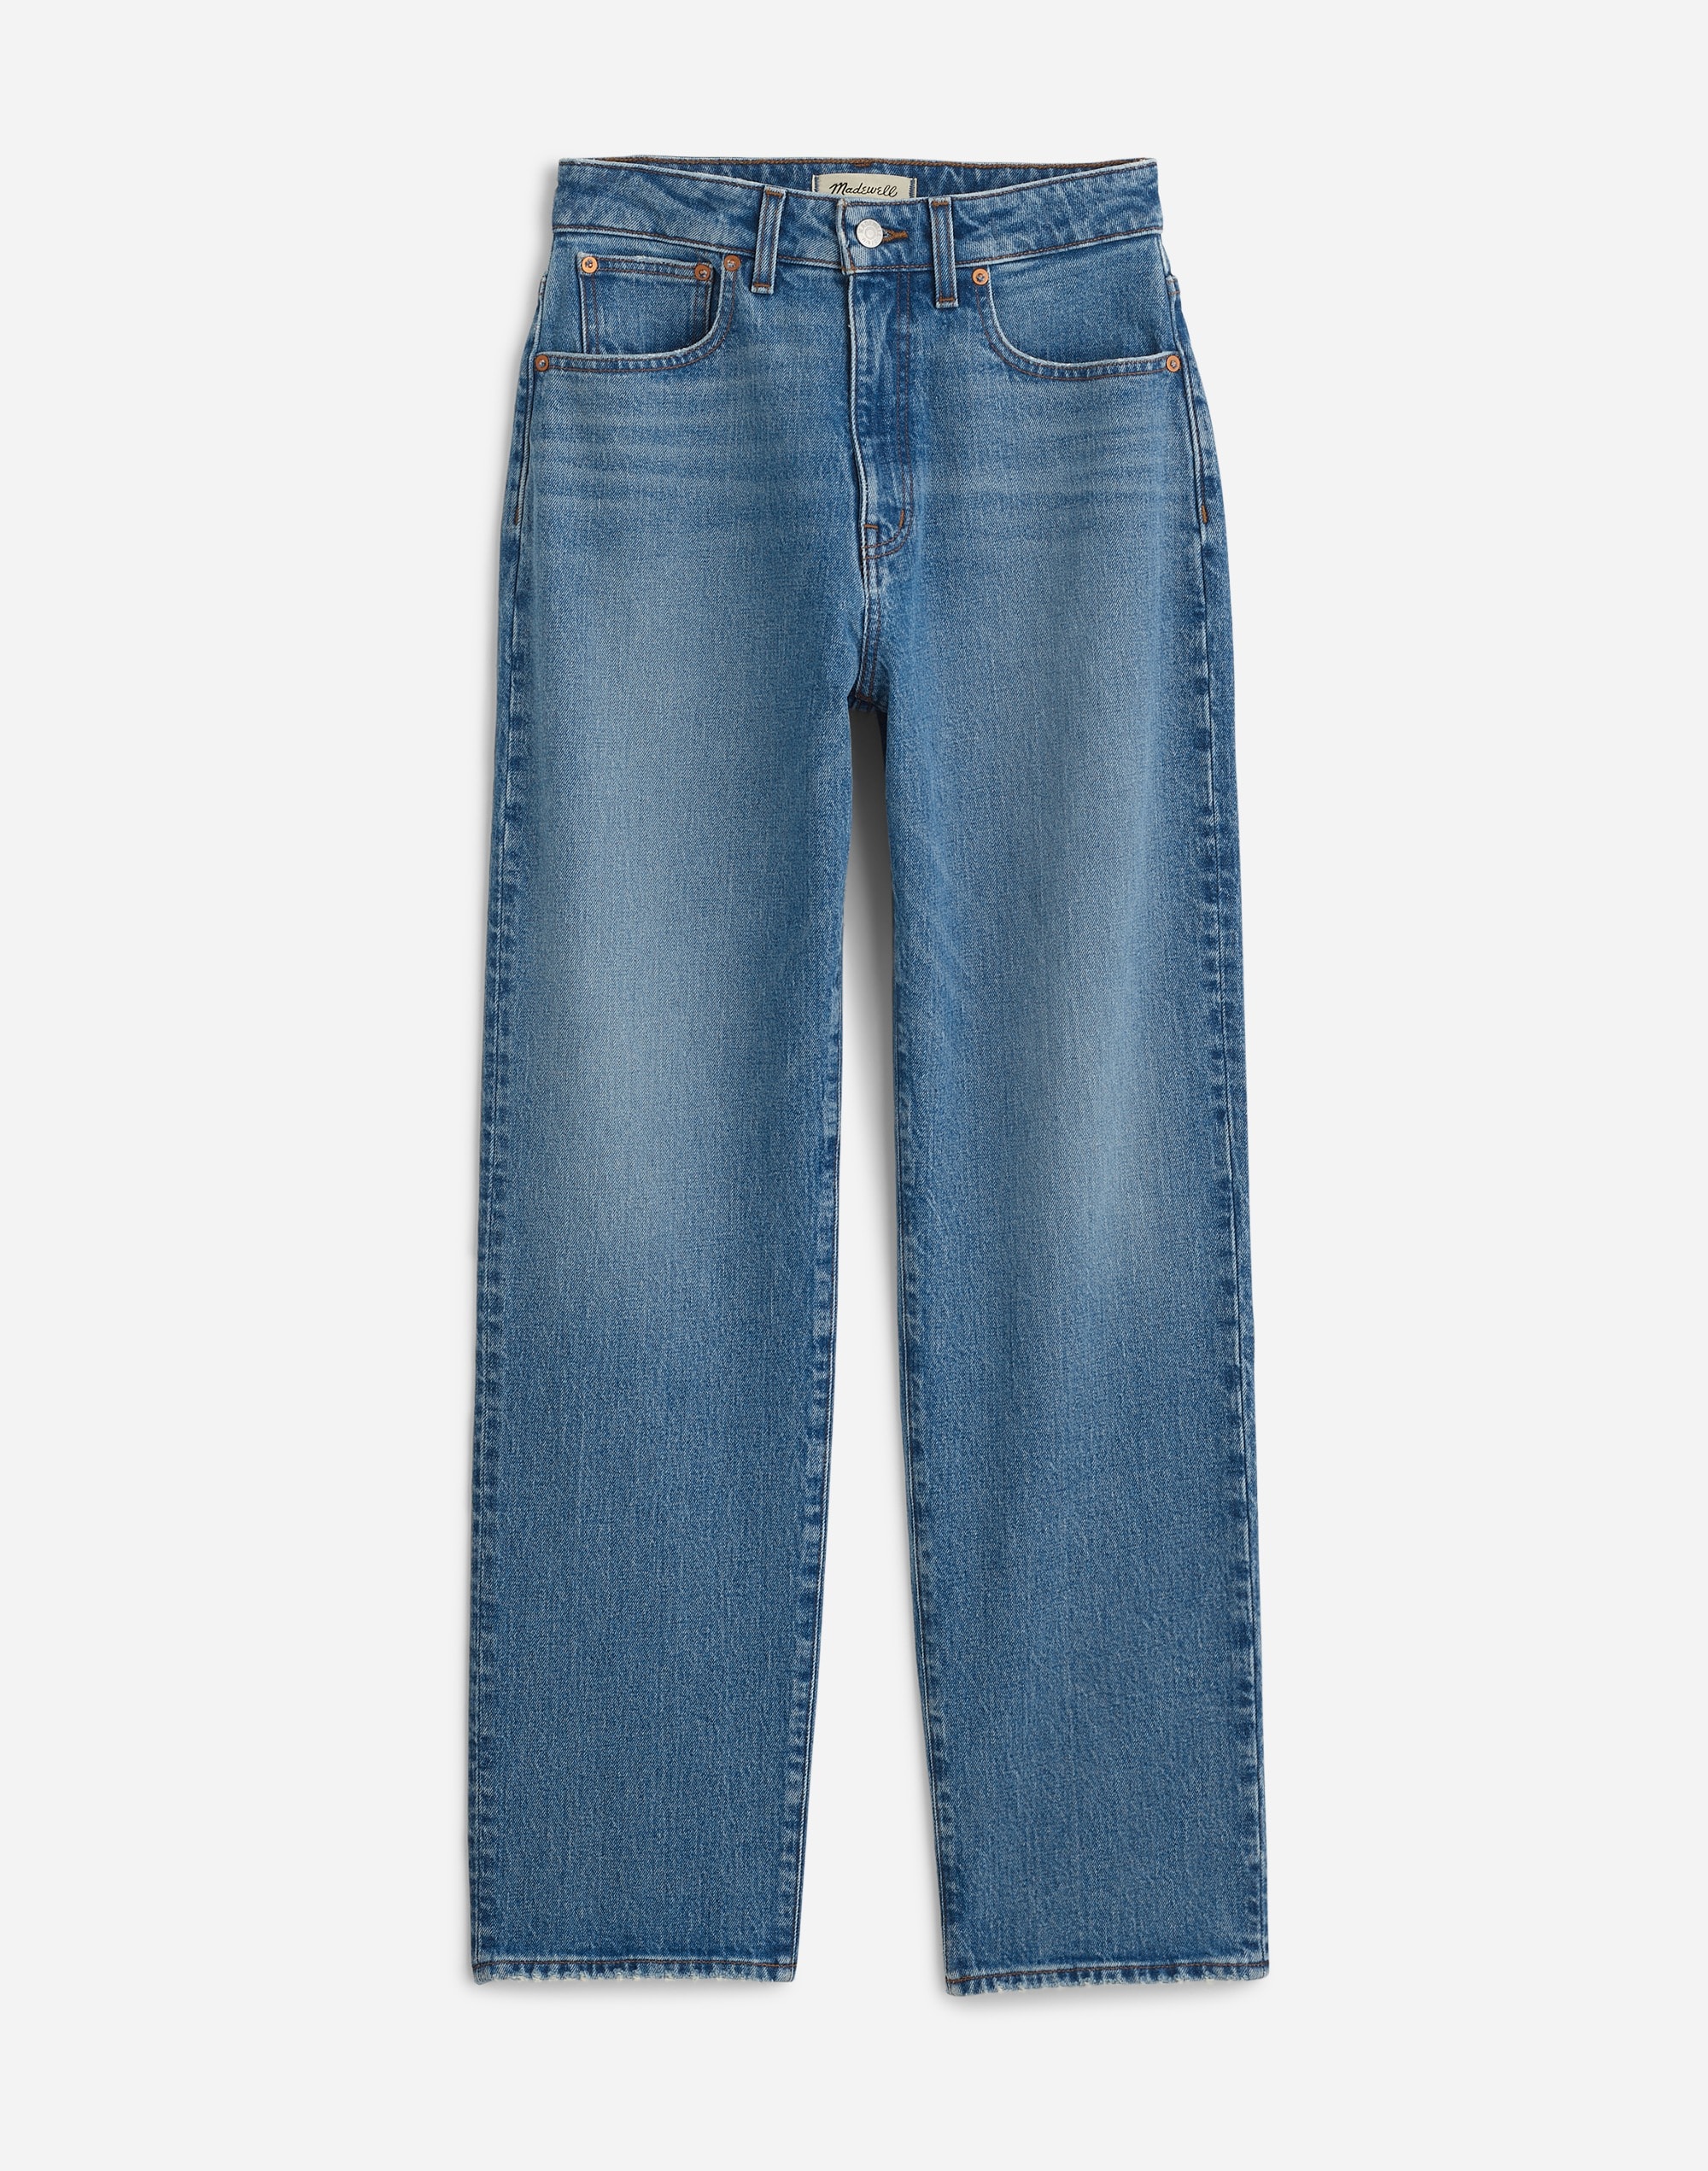 The Tall Curvy '90s Straight Crop Jean in Hazeldell Wash